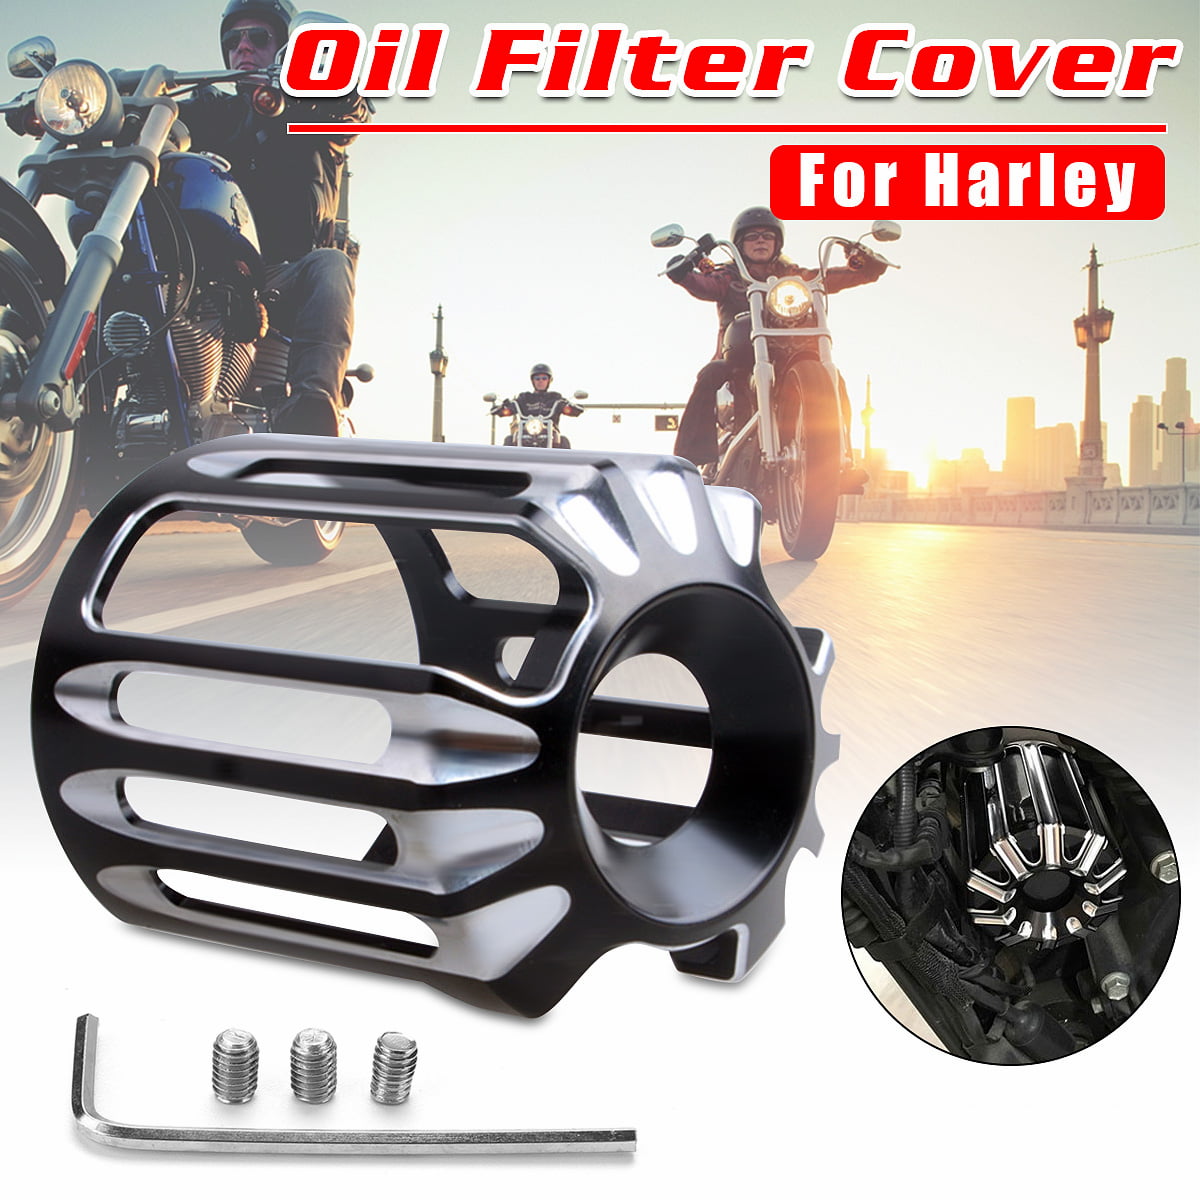 Re-usable Black Motorcycle CNC Cut Oil Filter Cover Cap Trim Aluminum for Harley